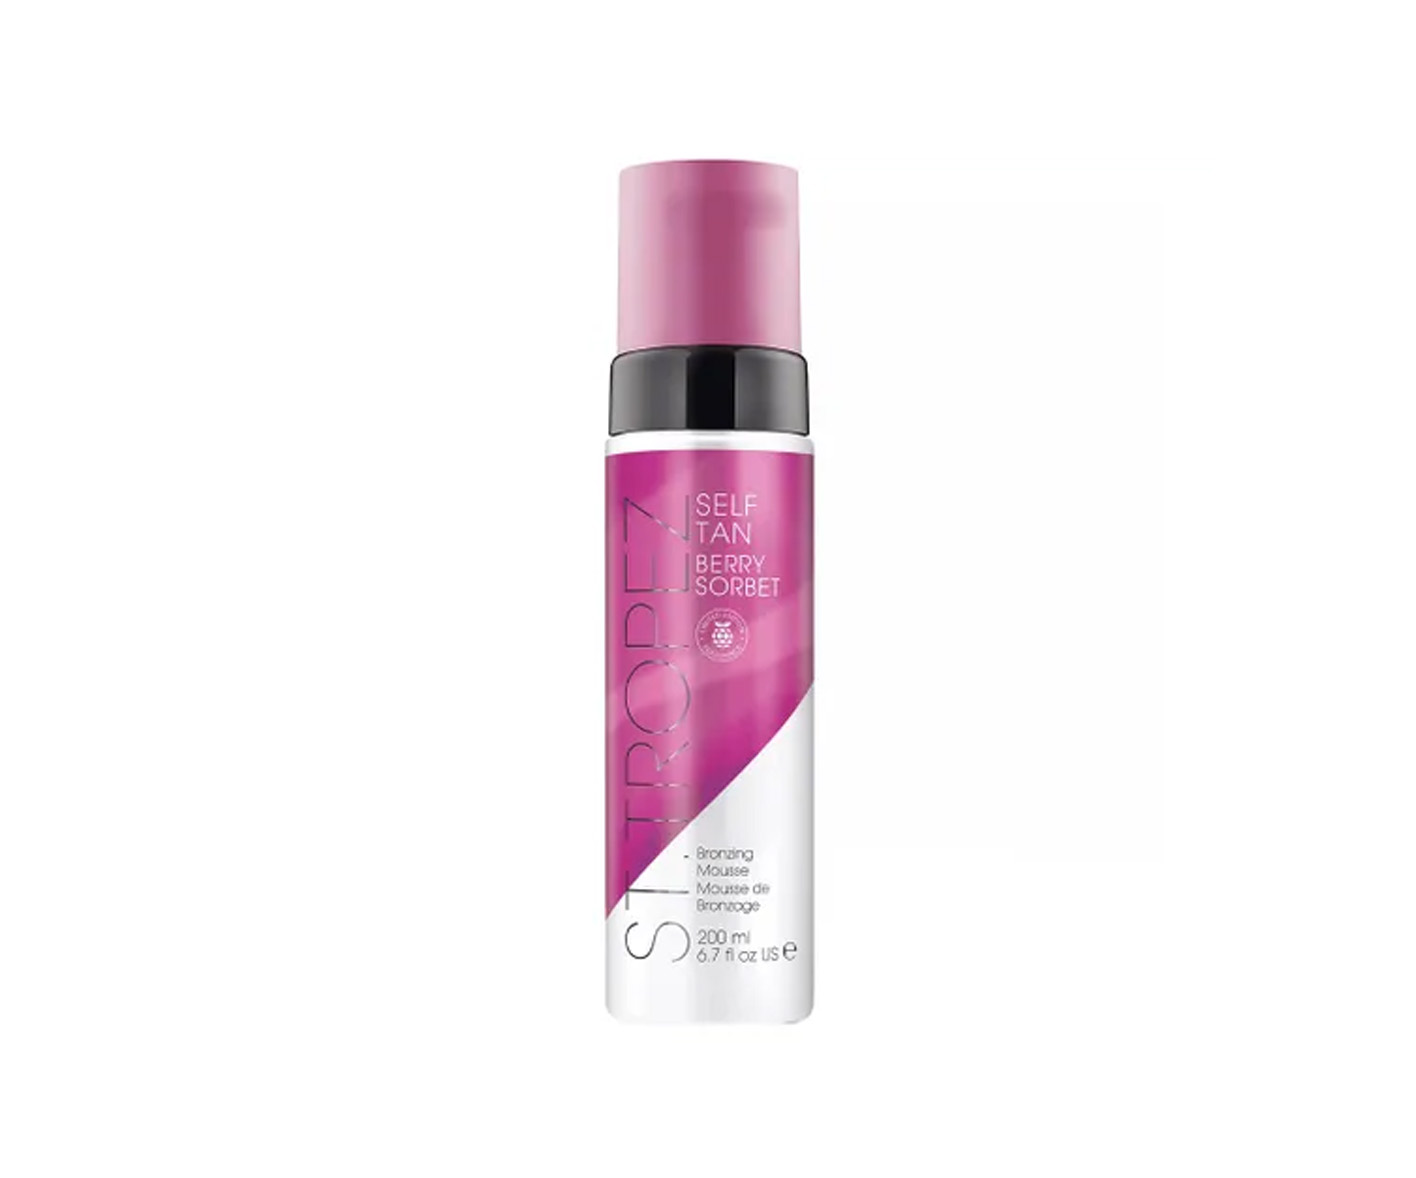 St. Tropez, Tan Berry Sorbet Bronzing Mousse, self-tanning body mousse